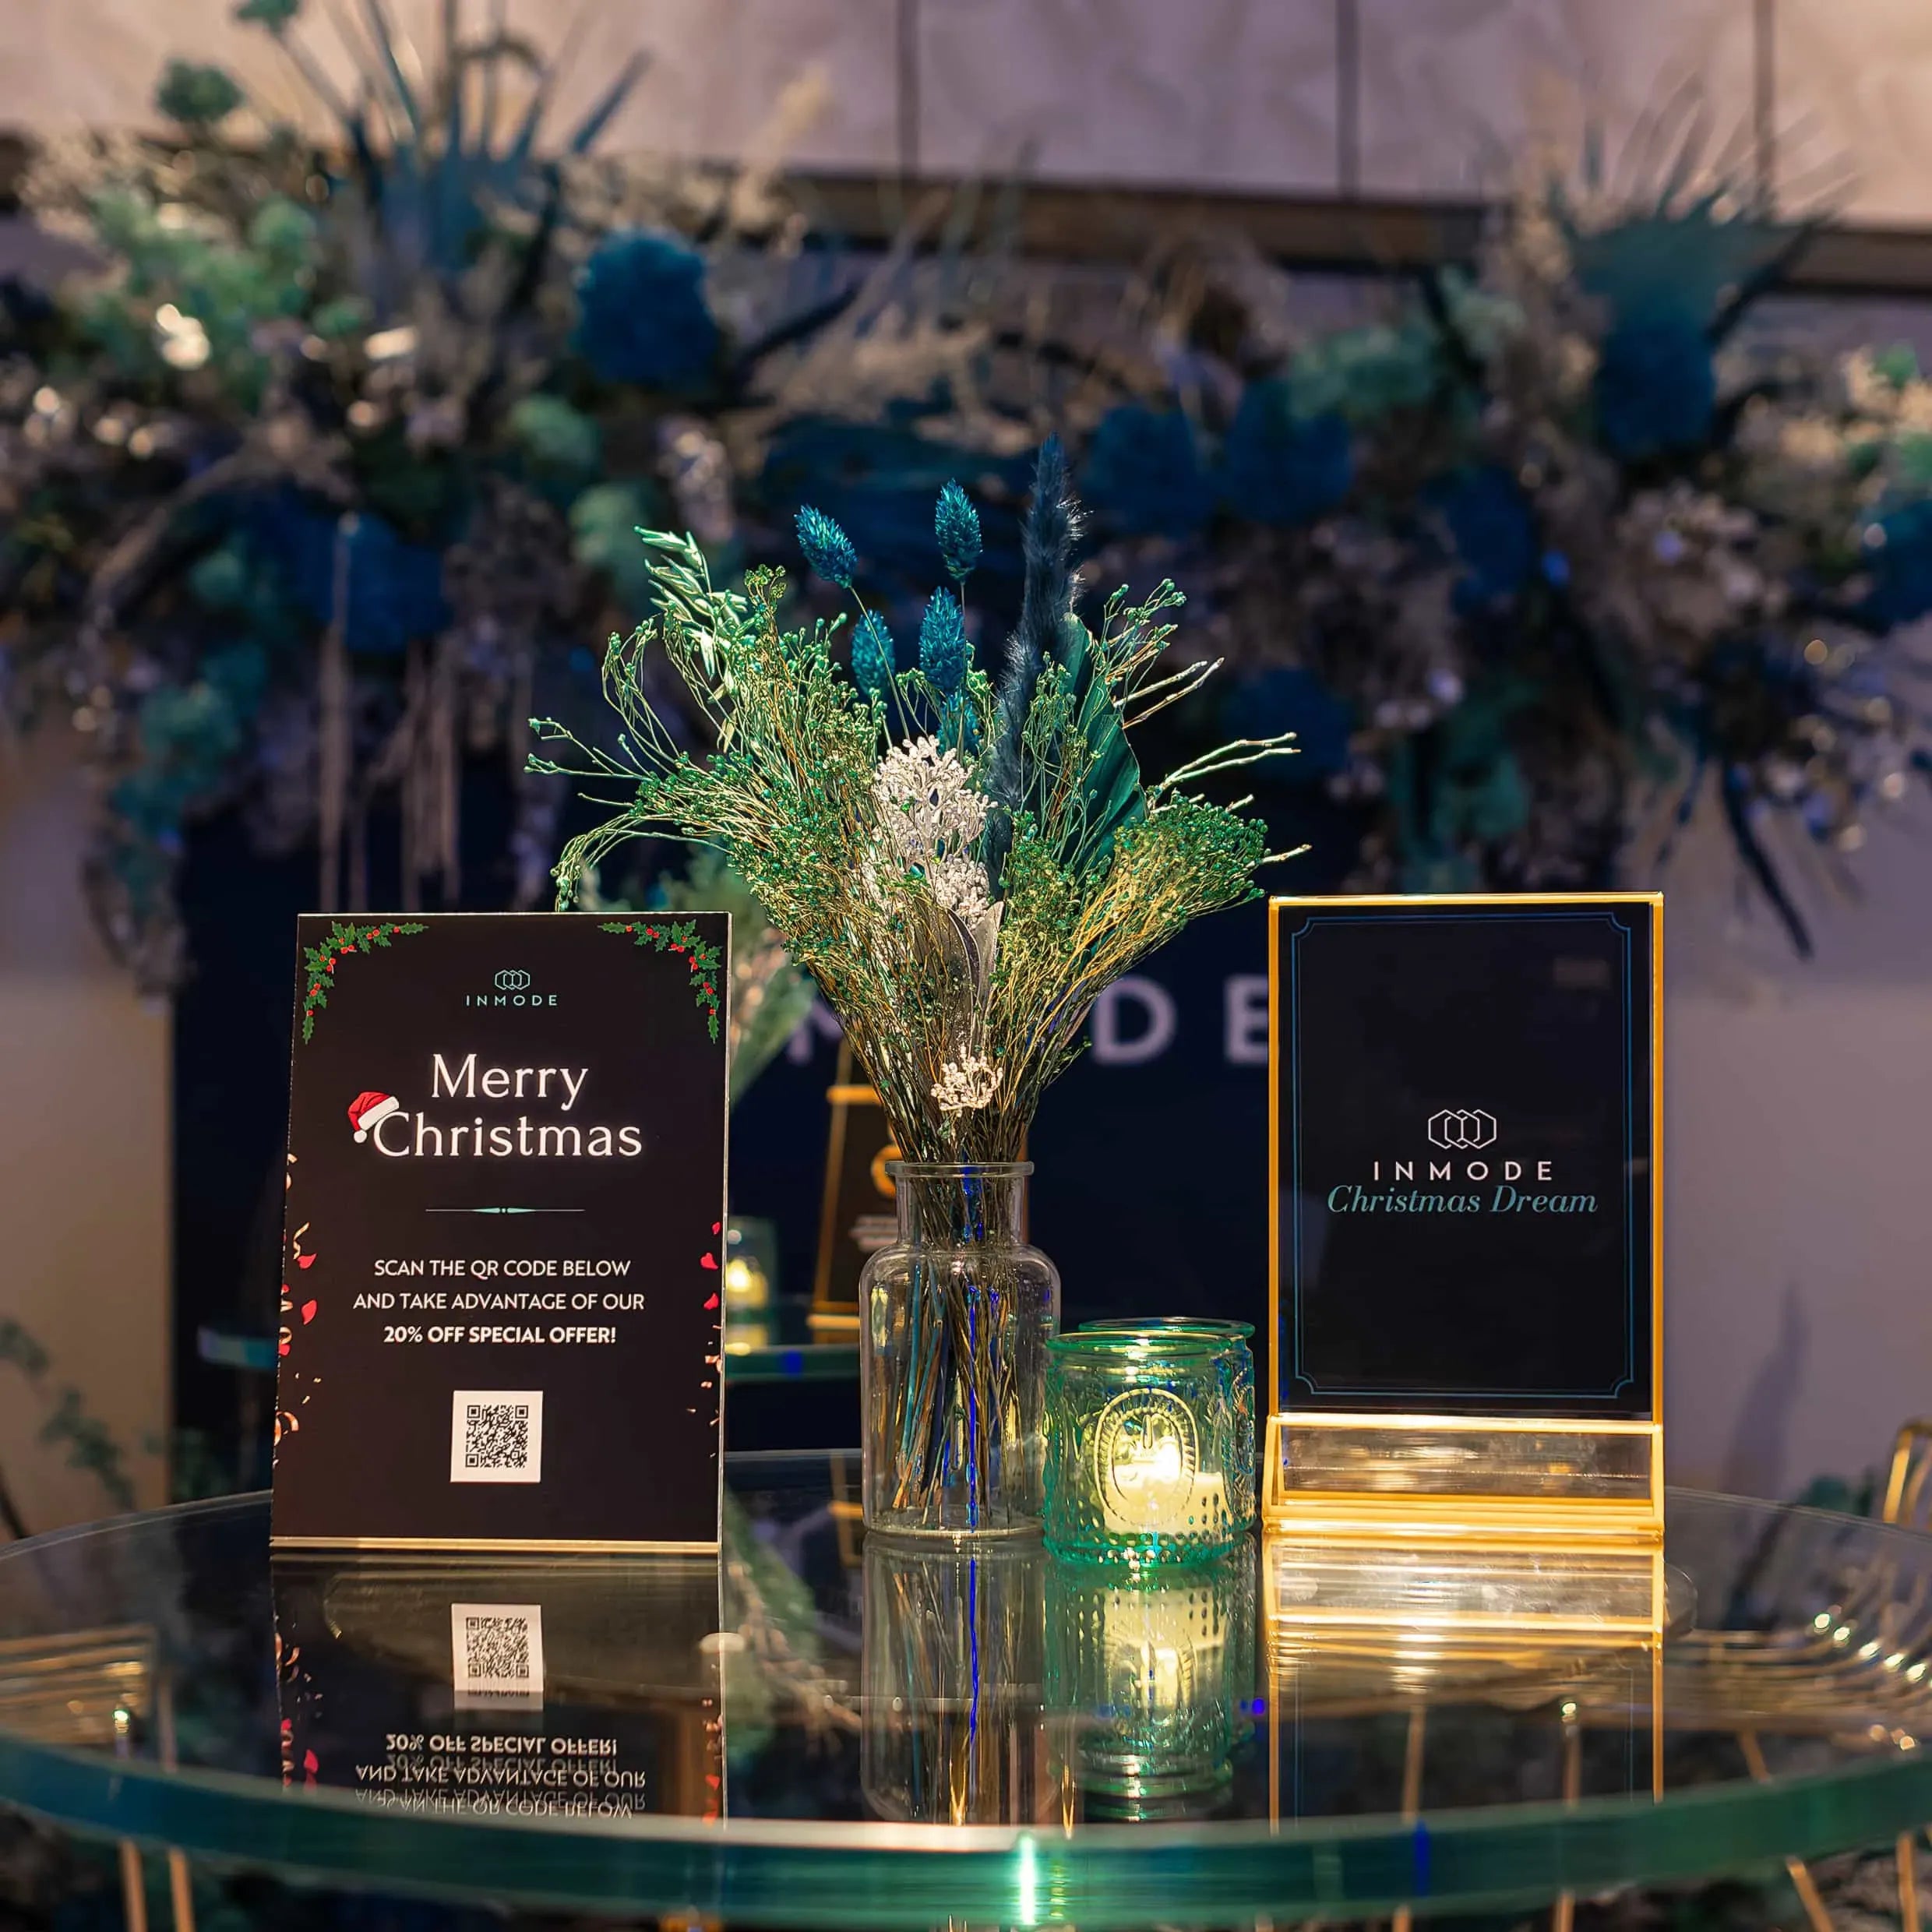 An elegant Christmas marketing setup on a glass table, displaying an INMODE 'Merry Christmas' card with a QR code, next to a branded 'INMODE Christmas Dream' plaque, with a vase of festive greenery and lit candles, all set against a backdrop of luxurious blue floral decorations. designed and created by Amarantè London.